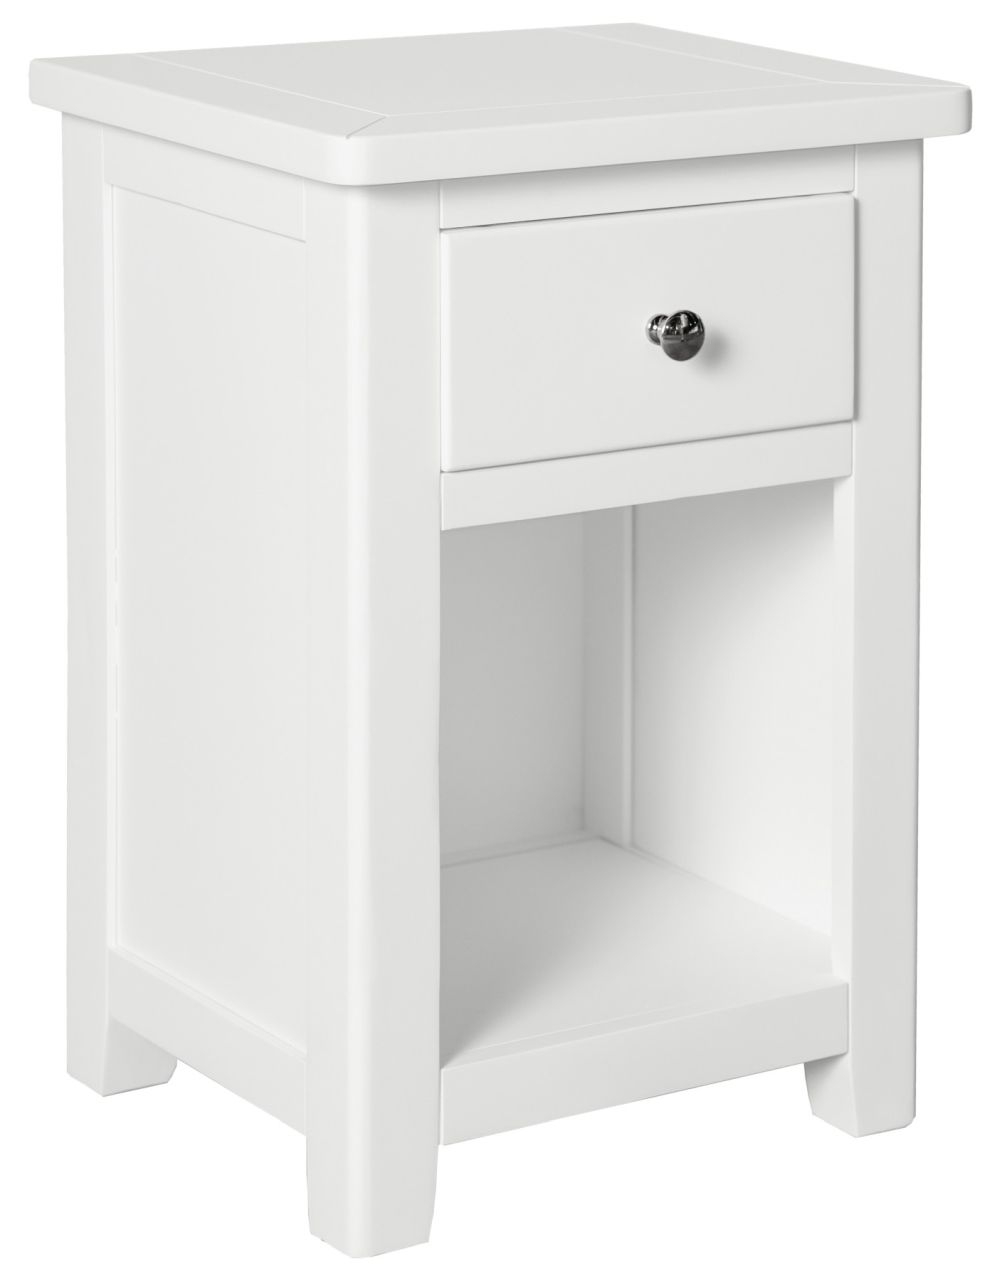 Henley White Painted 1 Drawer Bedside Cabinet